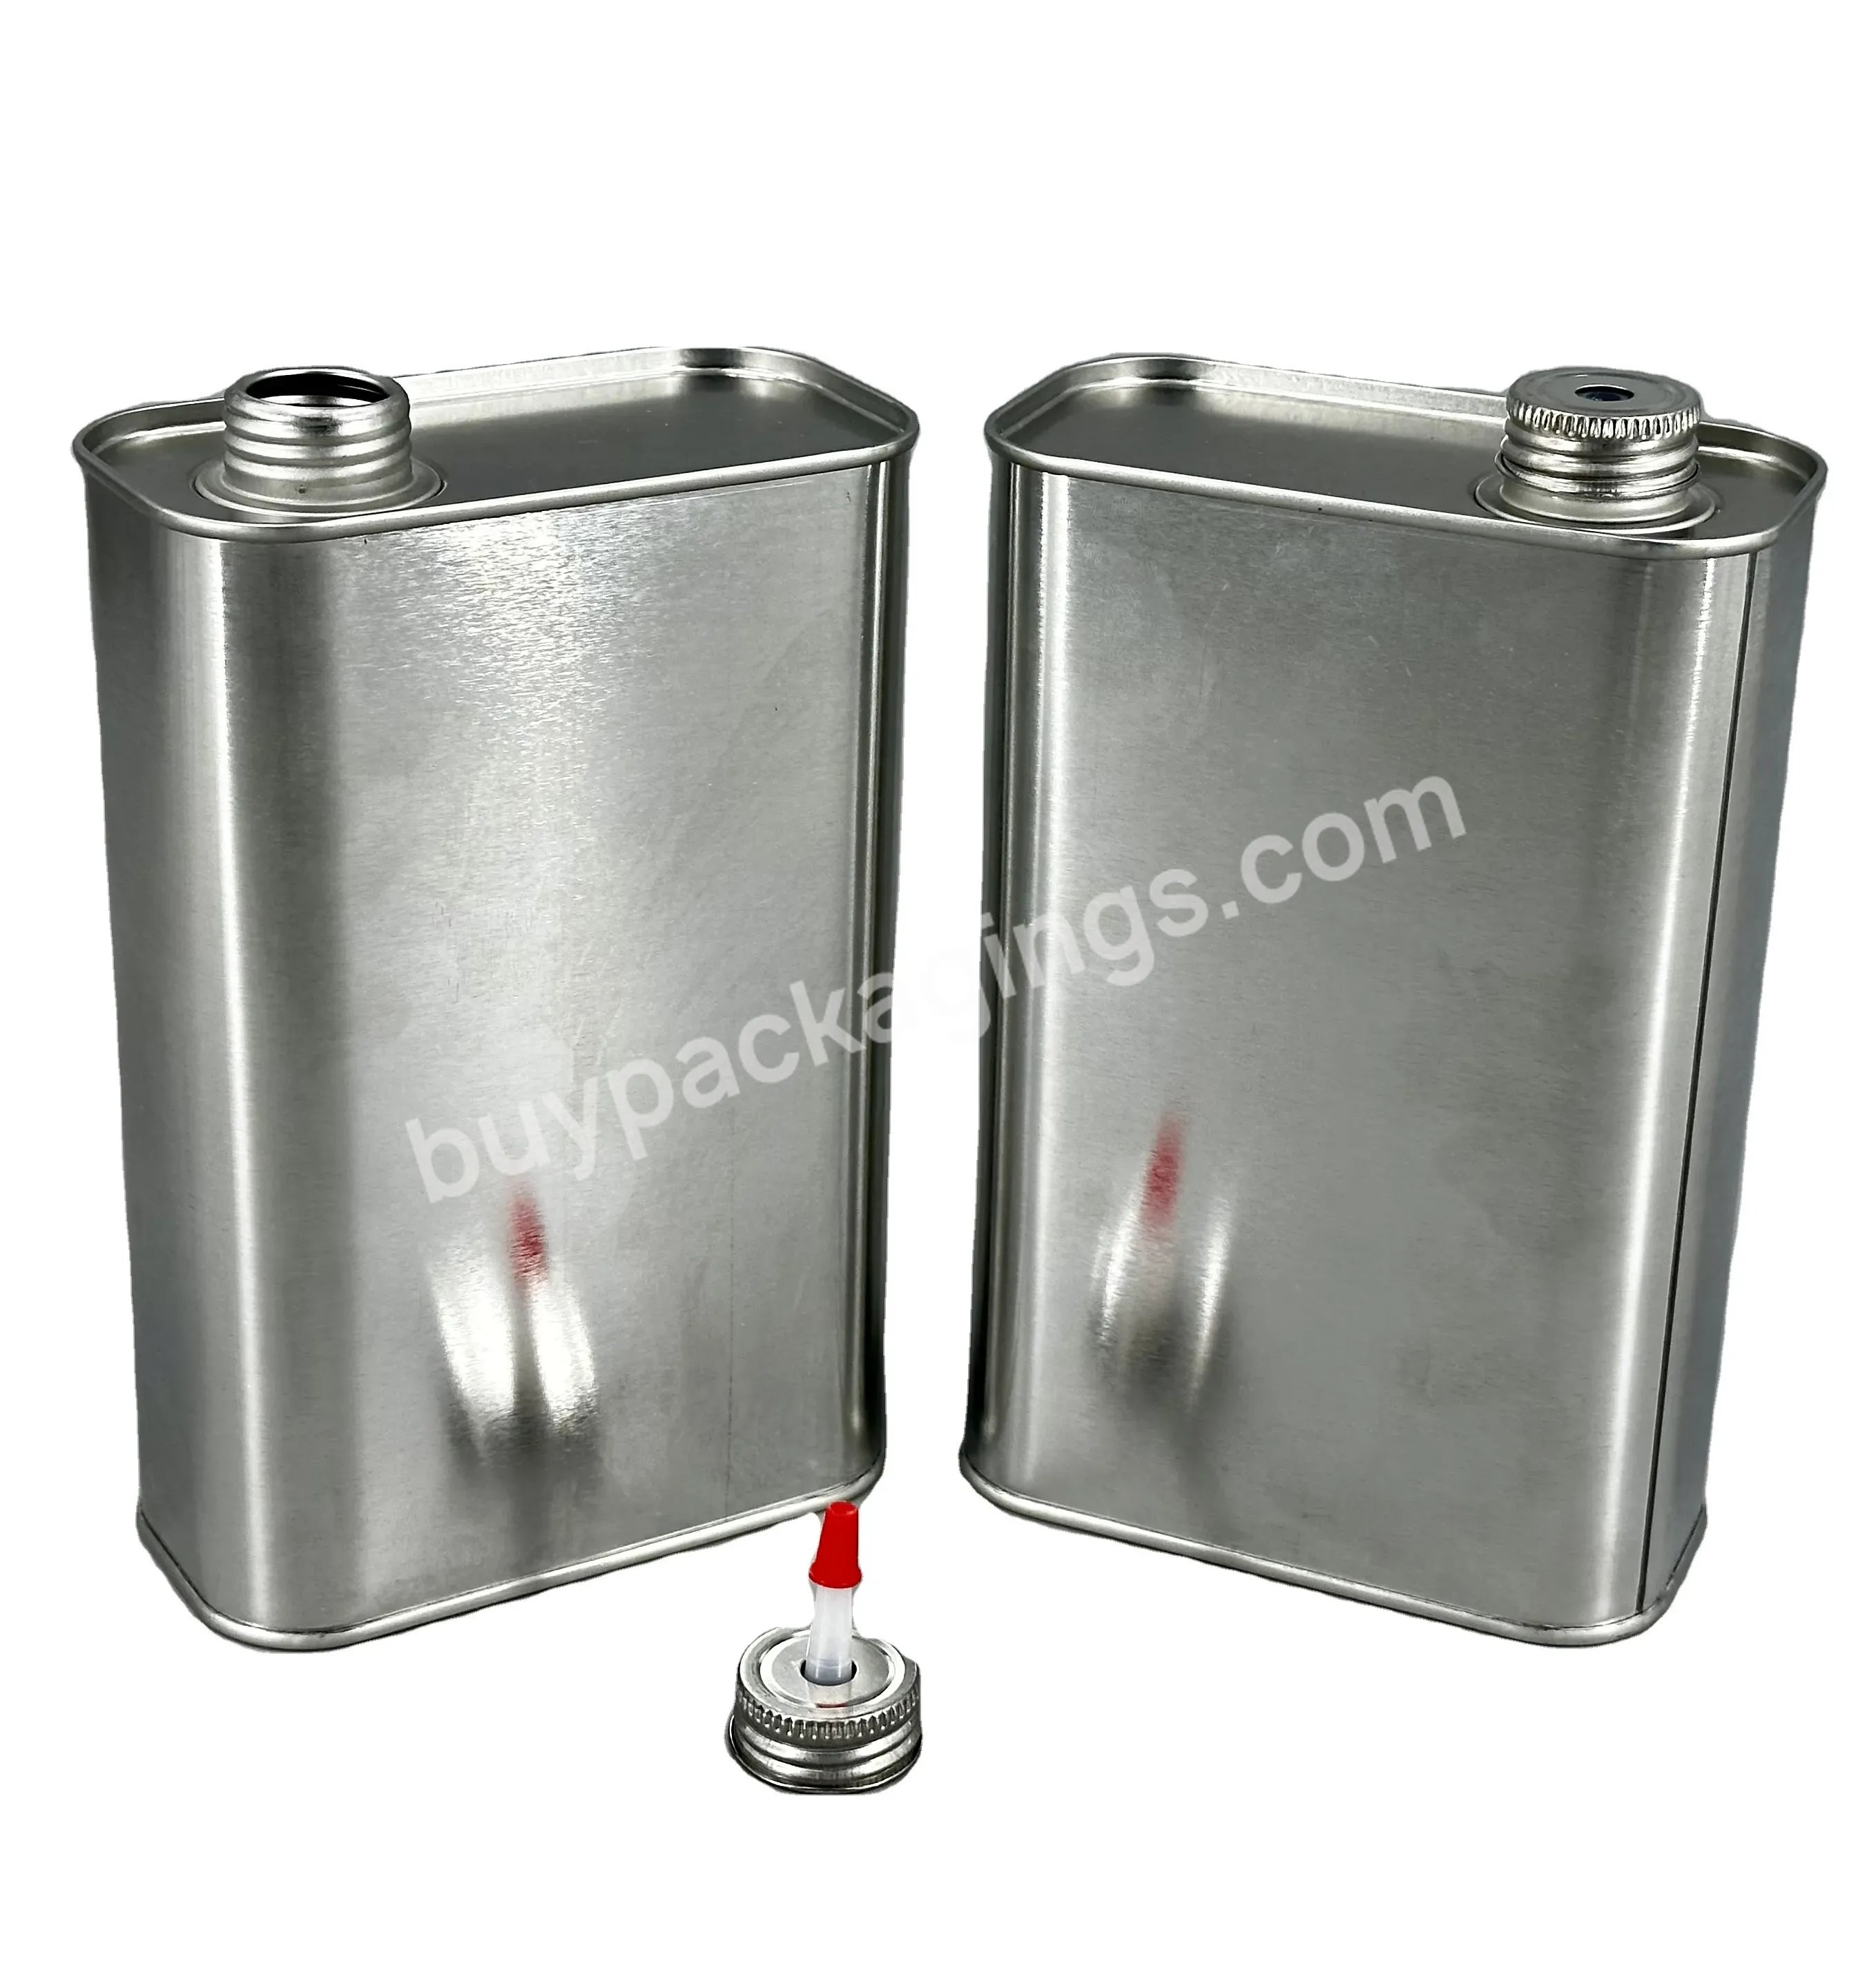 Custom 1l Oil Glue Container Square Tin Can With Plastic Cover And Screw Spout - Buy F-style Engine Oil Brake Oil Motor Oil Tin Can With Spout,Custom 1l Oil Container Square Tin Can,Tinplate Glue Tin Can With Plastic Spout Cover.